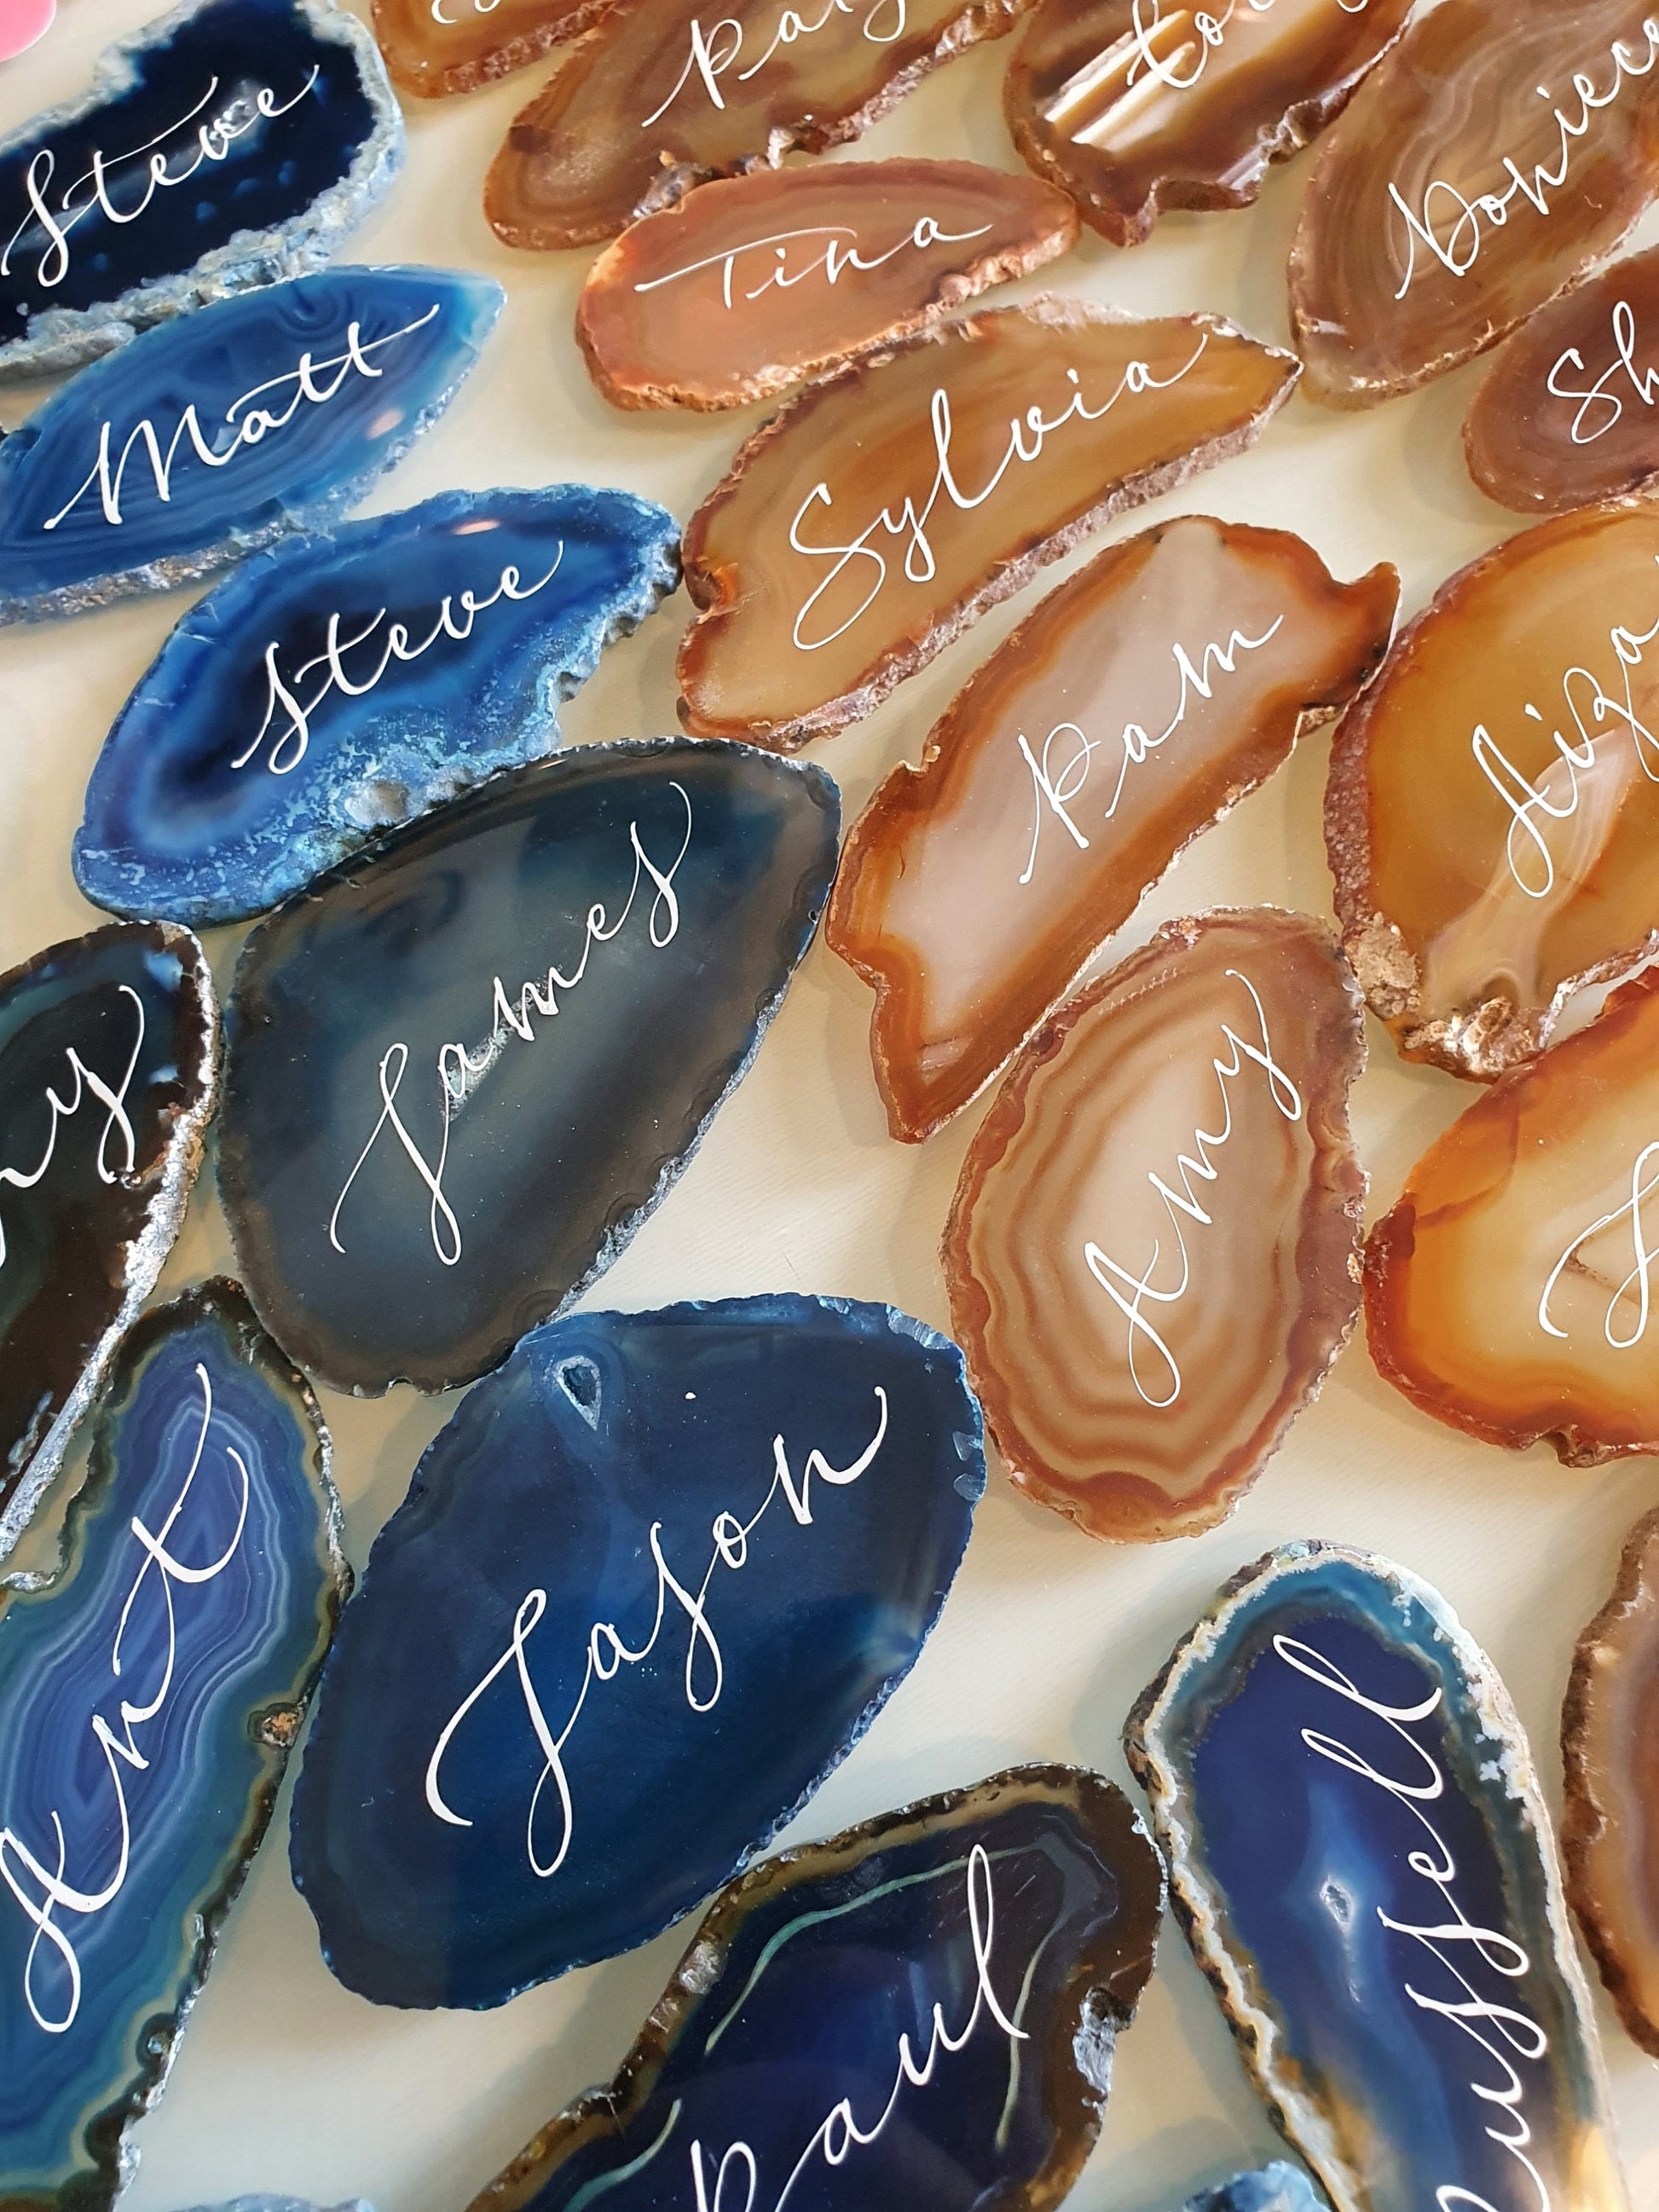 Blue Agate Place Cards - Agate Slice Wedding place names - Agate Place cards - Agate Calligraphy - Agate Placemats - Agate Place Settings